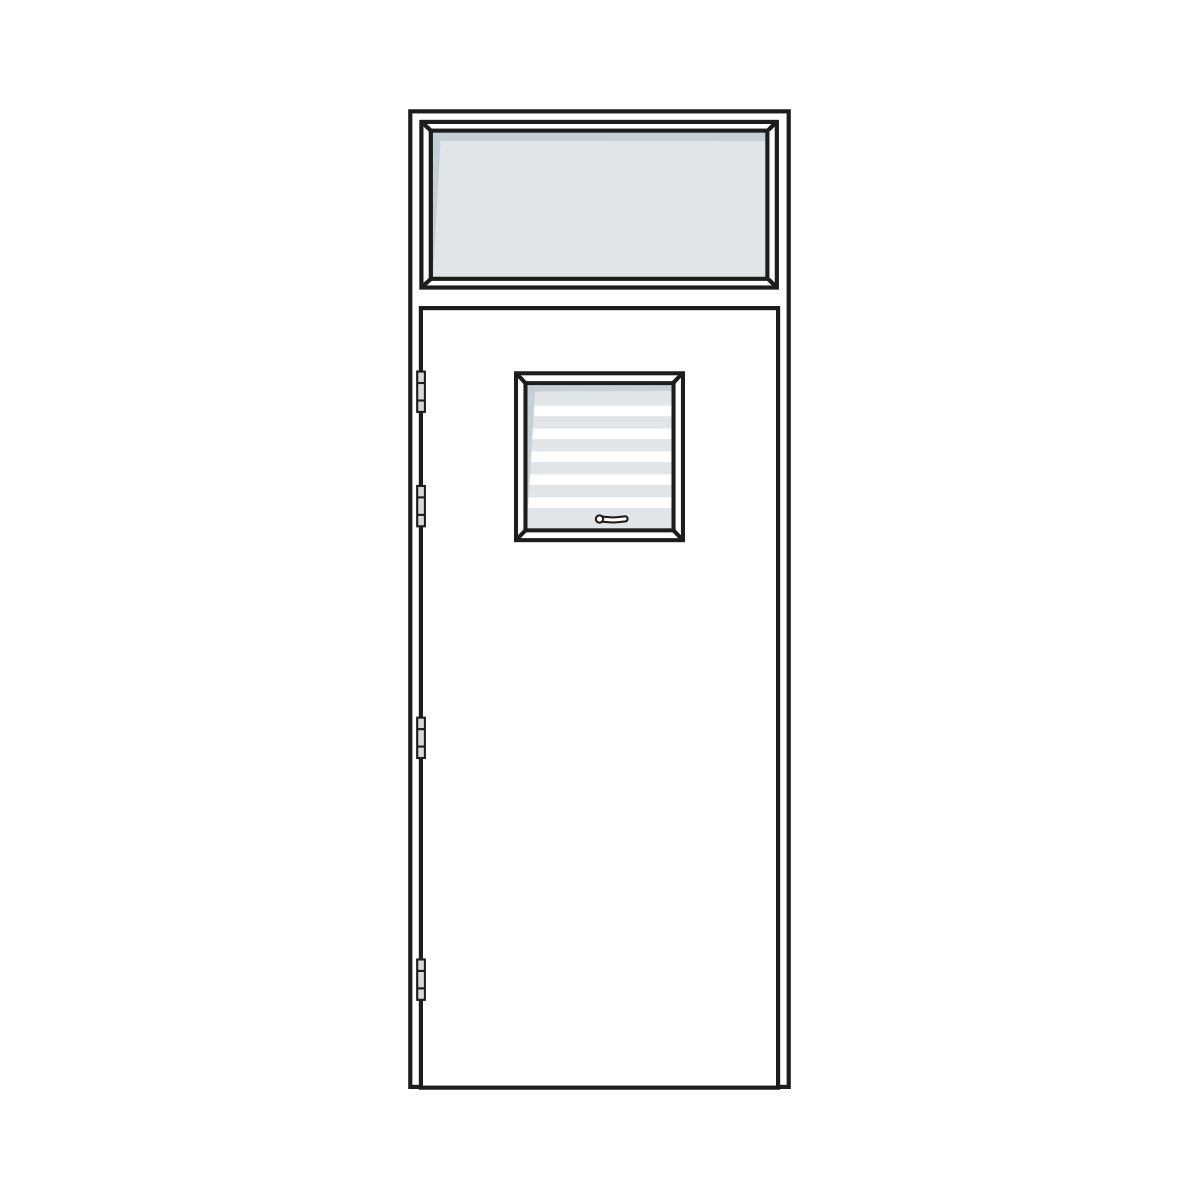 Door Configuration - Single Pair Doorset with Privacy Vision Panel and Fanlight - Code S-PV-FL